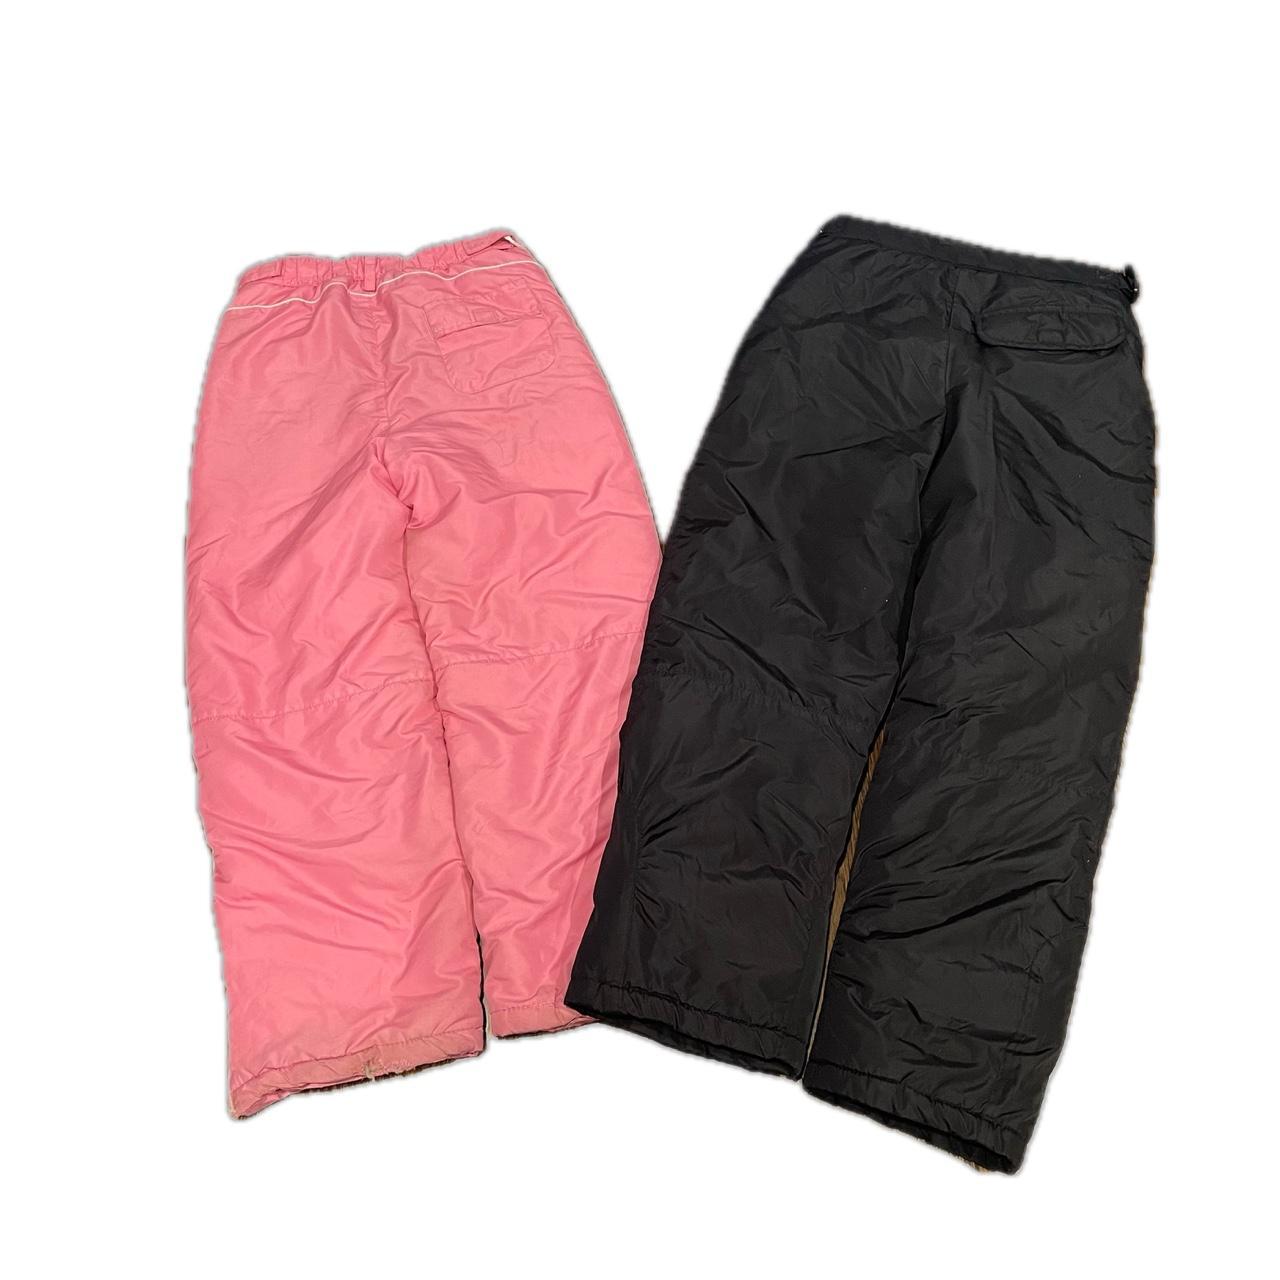 London Fog Women's Black and Pink Joggers-tracksuits (2)